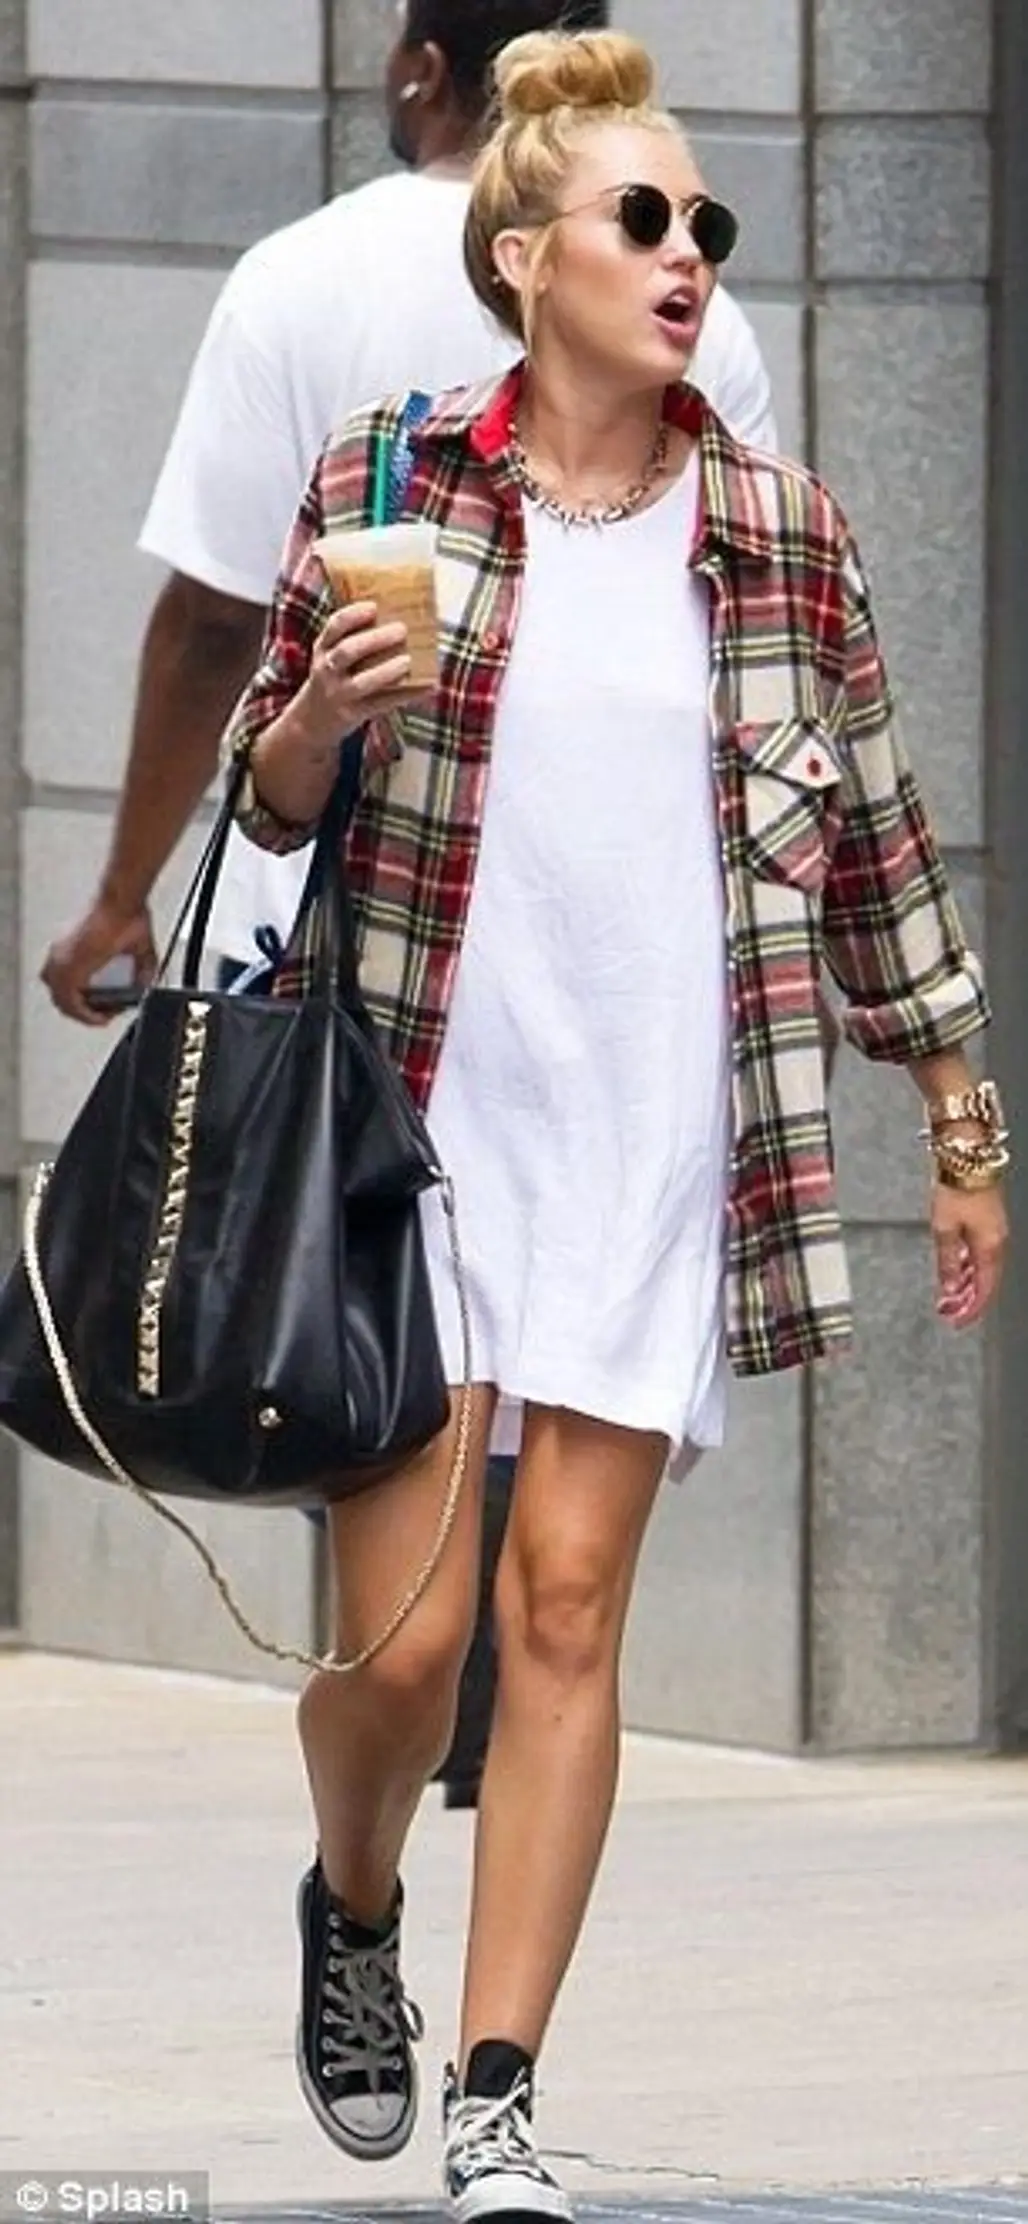 Miley's Oversized Plaid Shirt and High Bun Prove That Grungy Can Totally Be Sexy